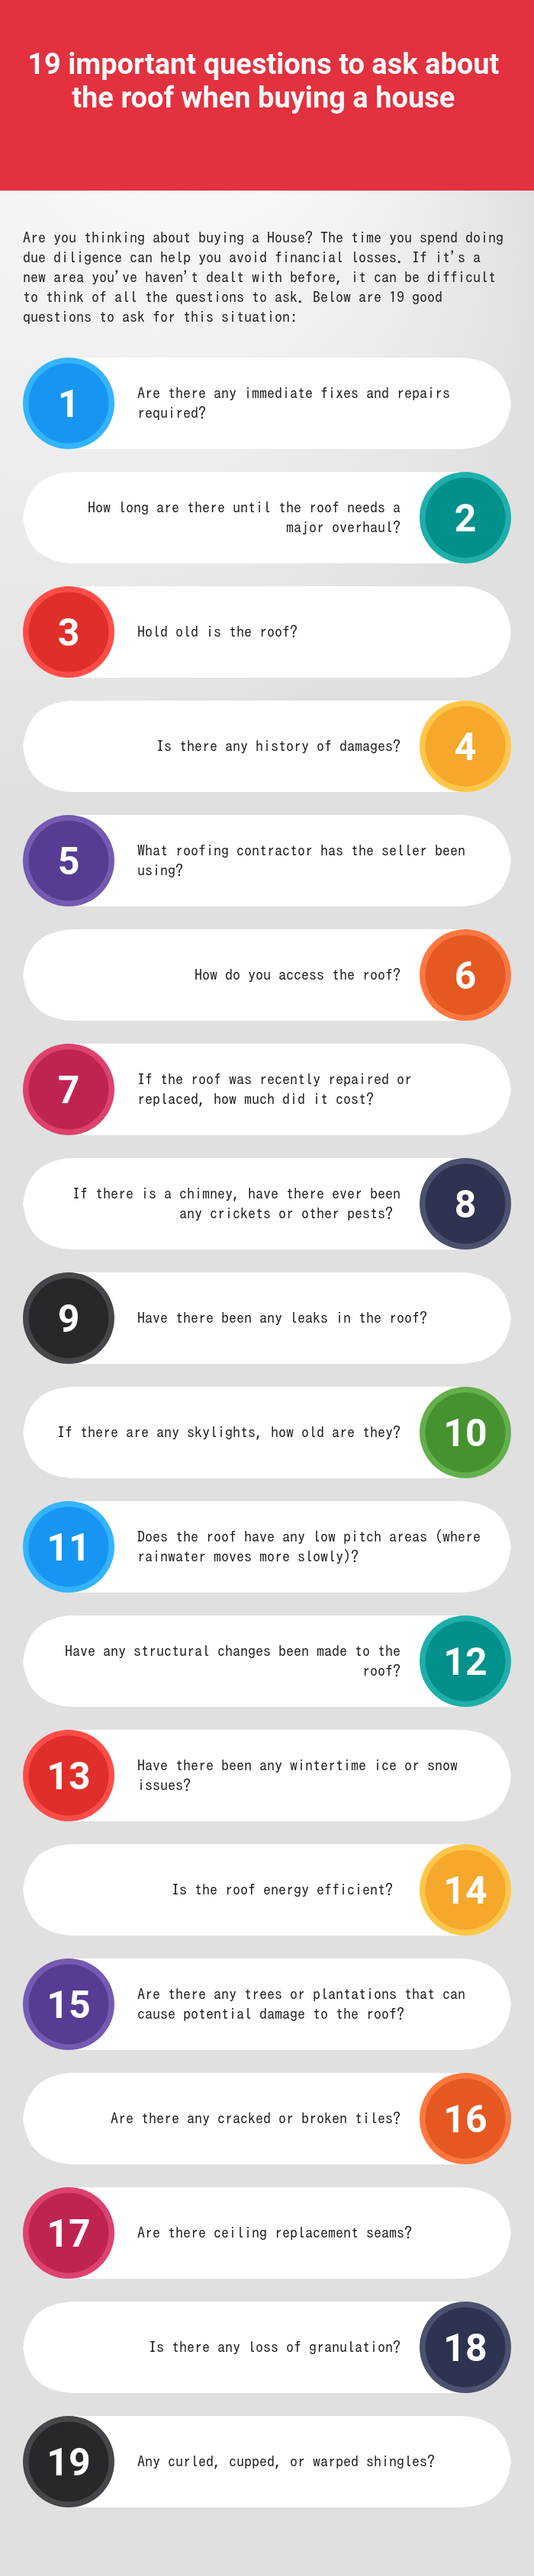 19 important questions to ask about the roof when buying a house